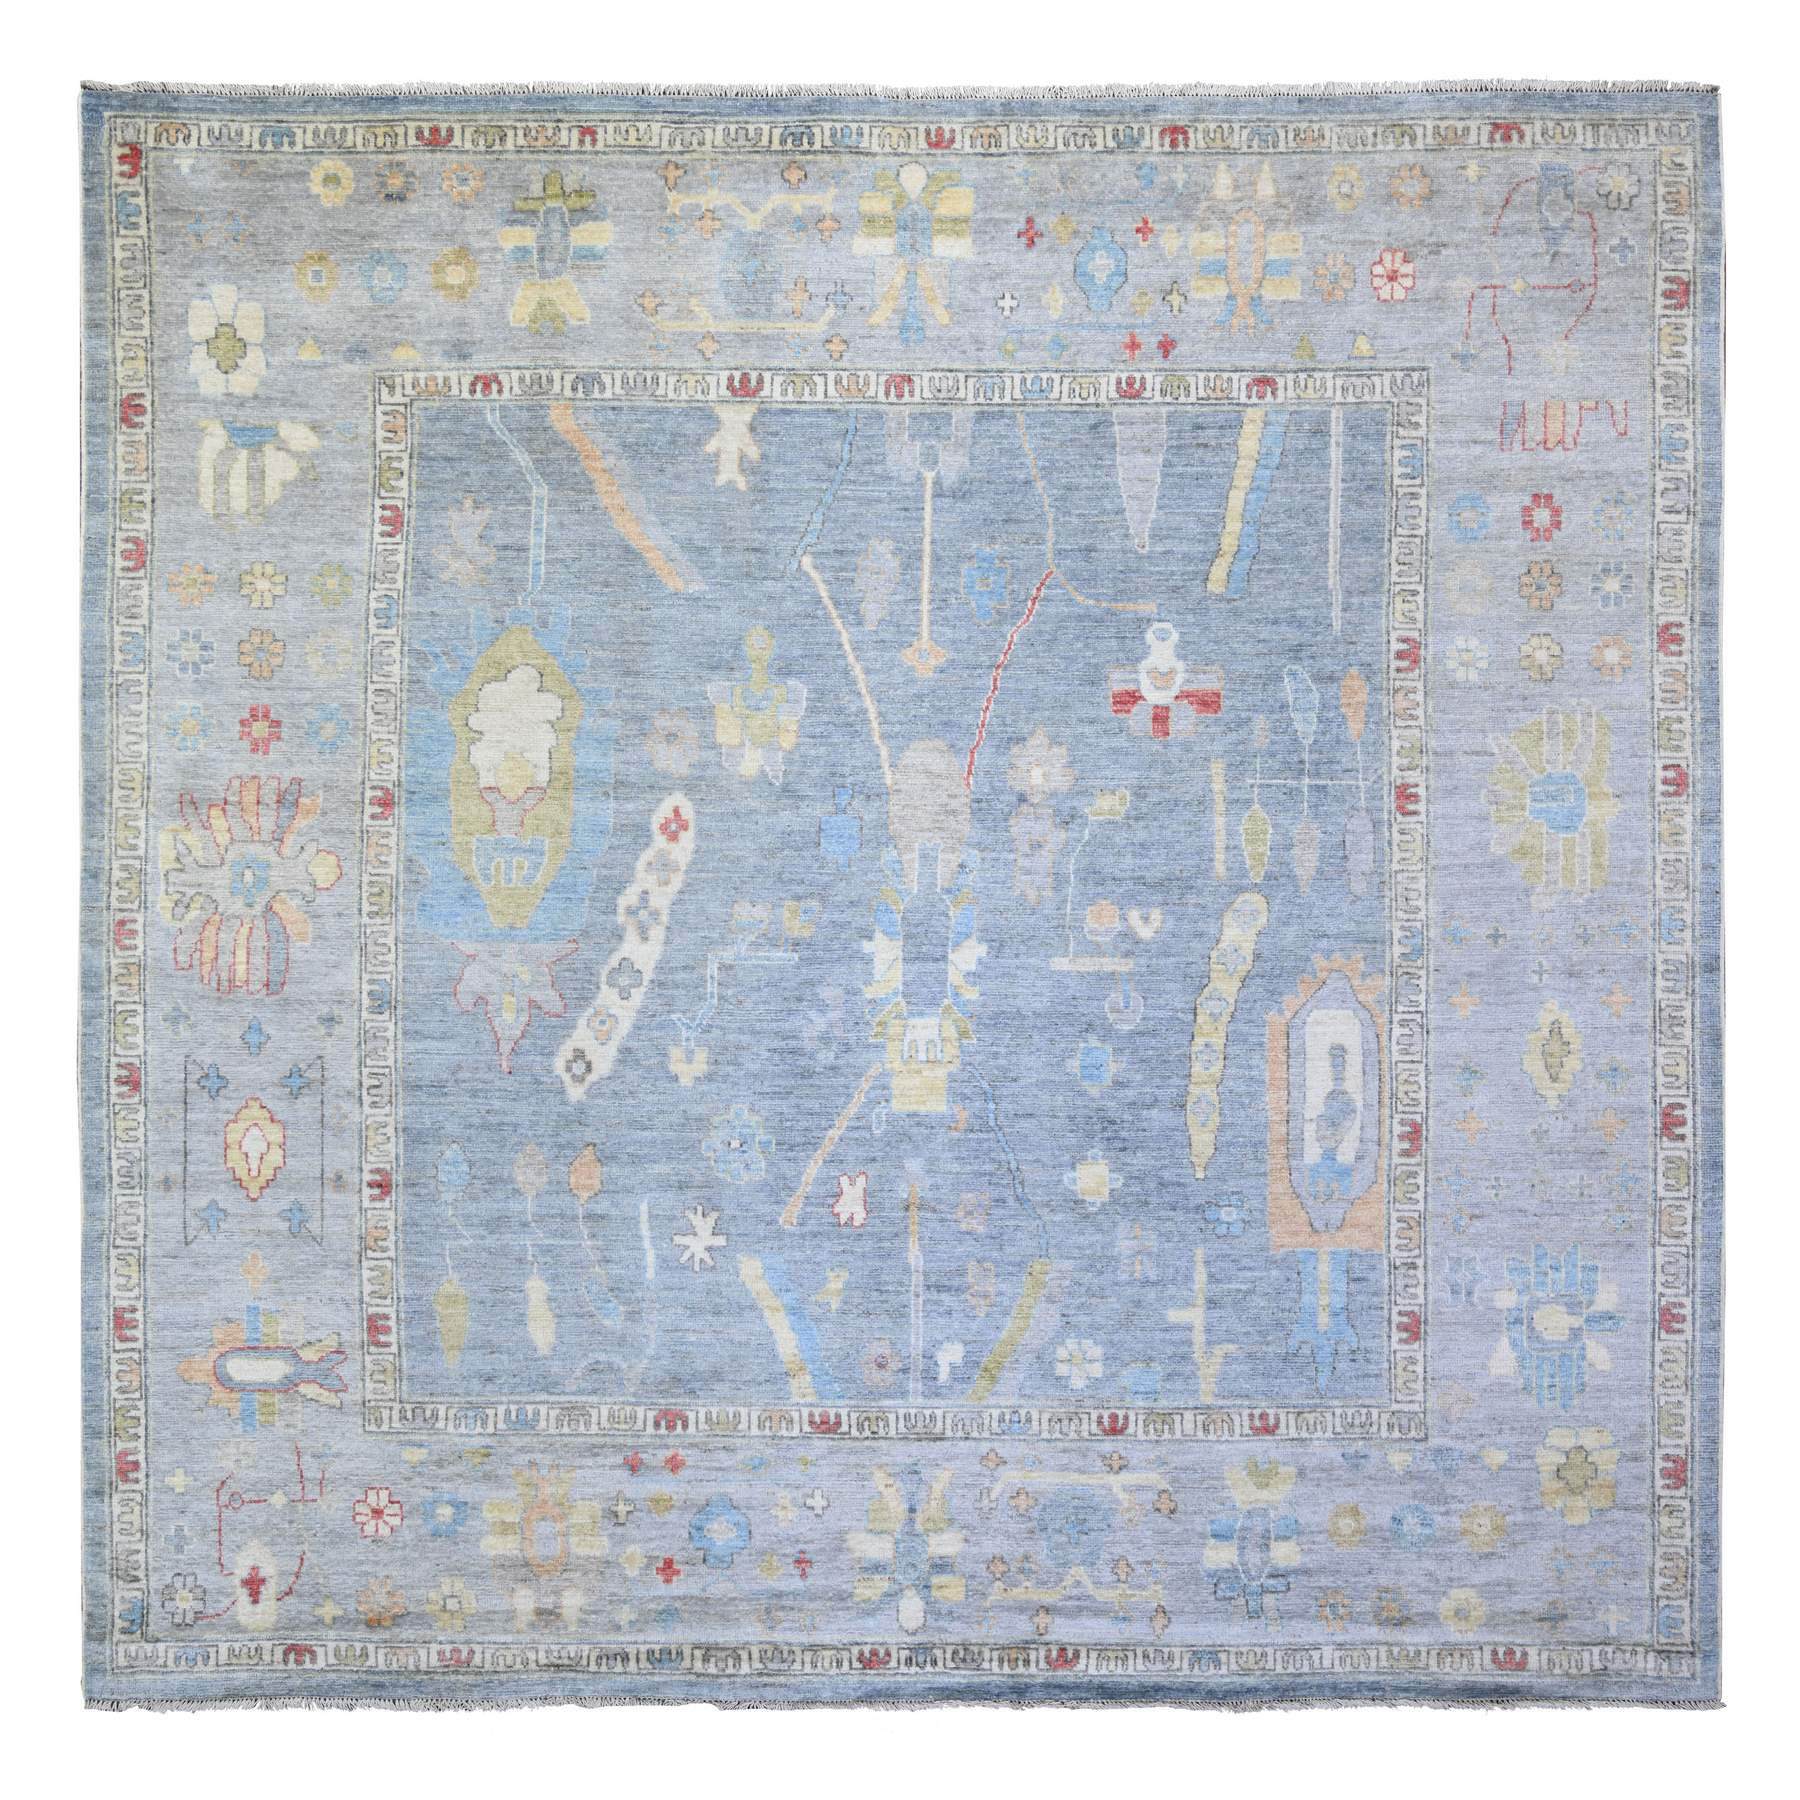 9'10"x9'10" Periwinkle Blue, Hand Woven Afghan Angora Oushak with Soft Colors, Natural Dyes Natural Wool, Square Oriental Rug 